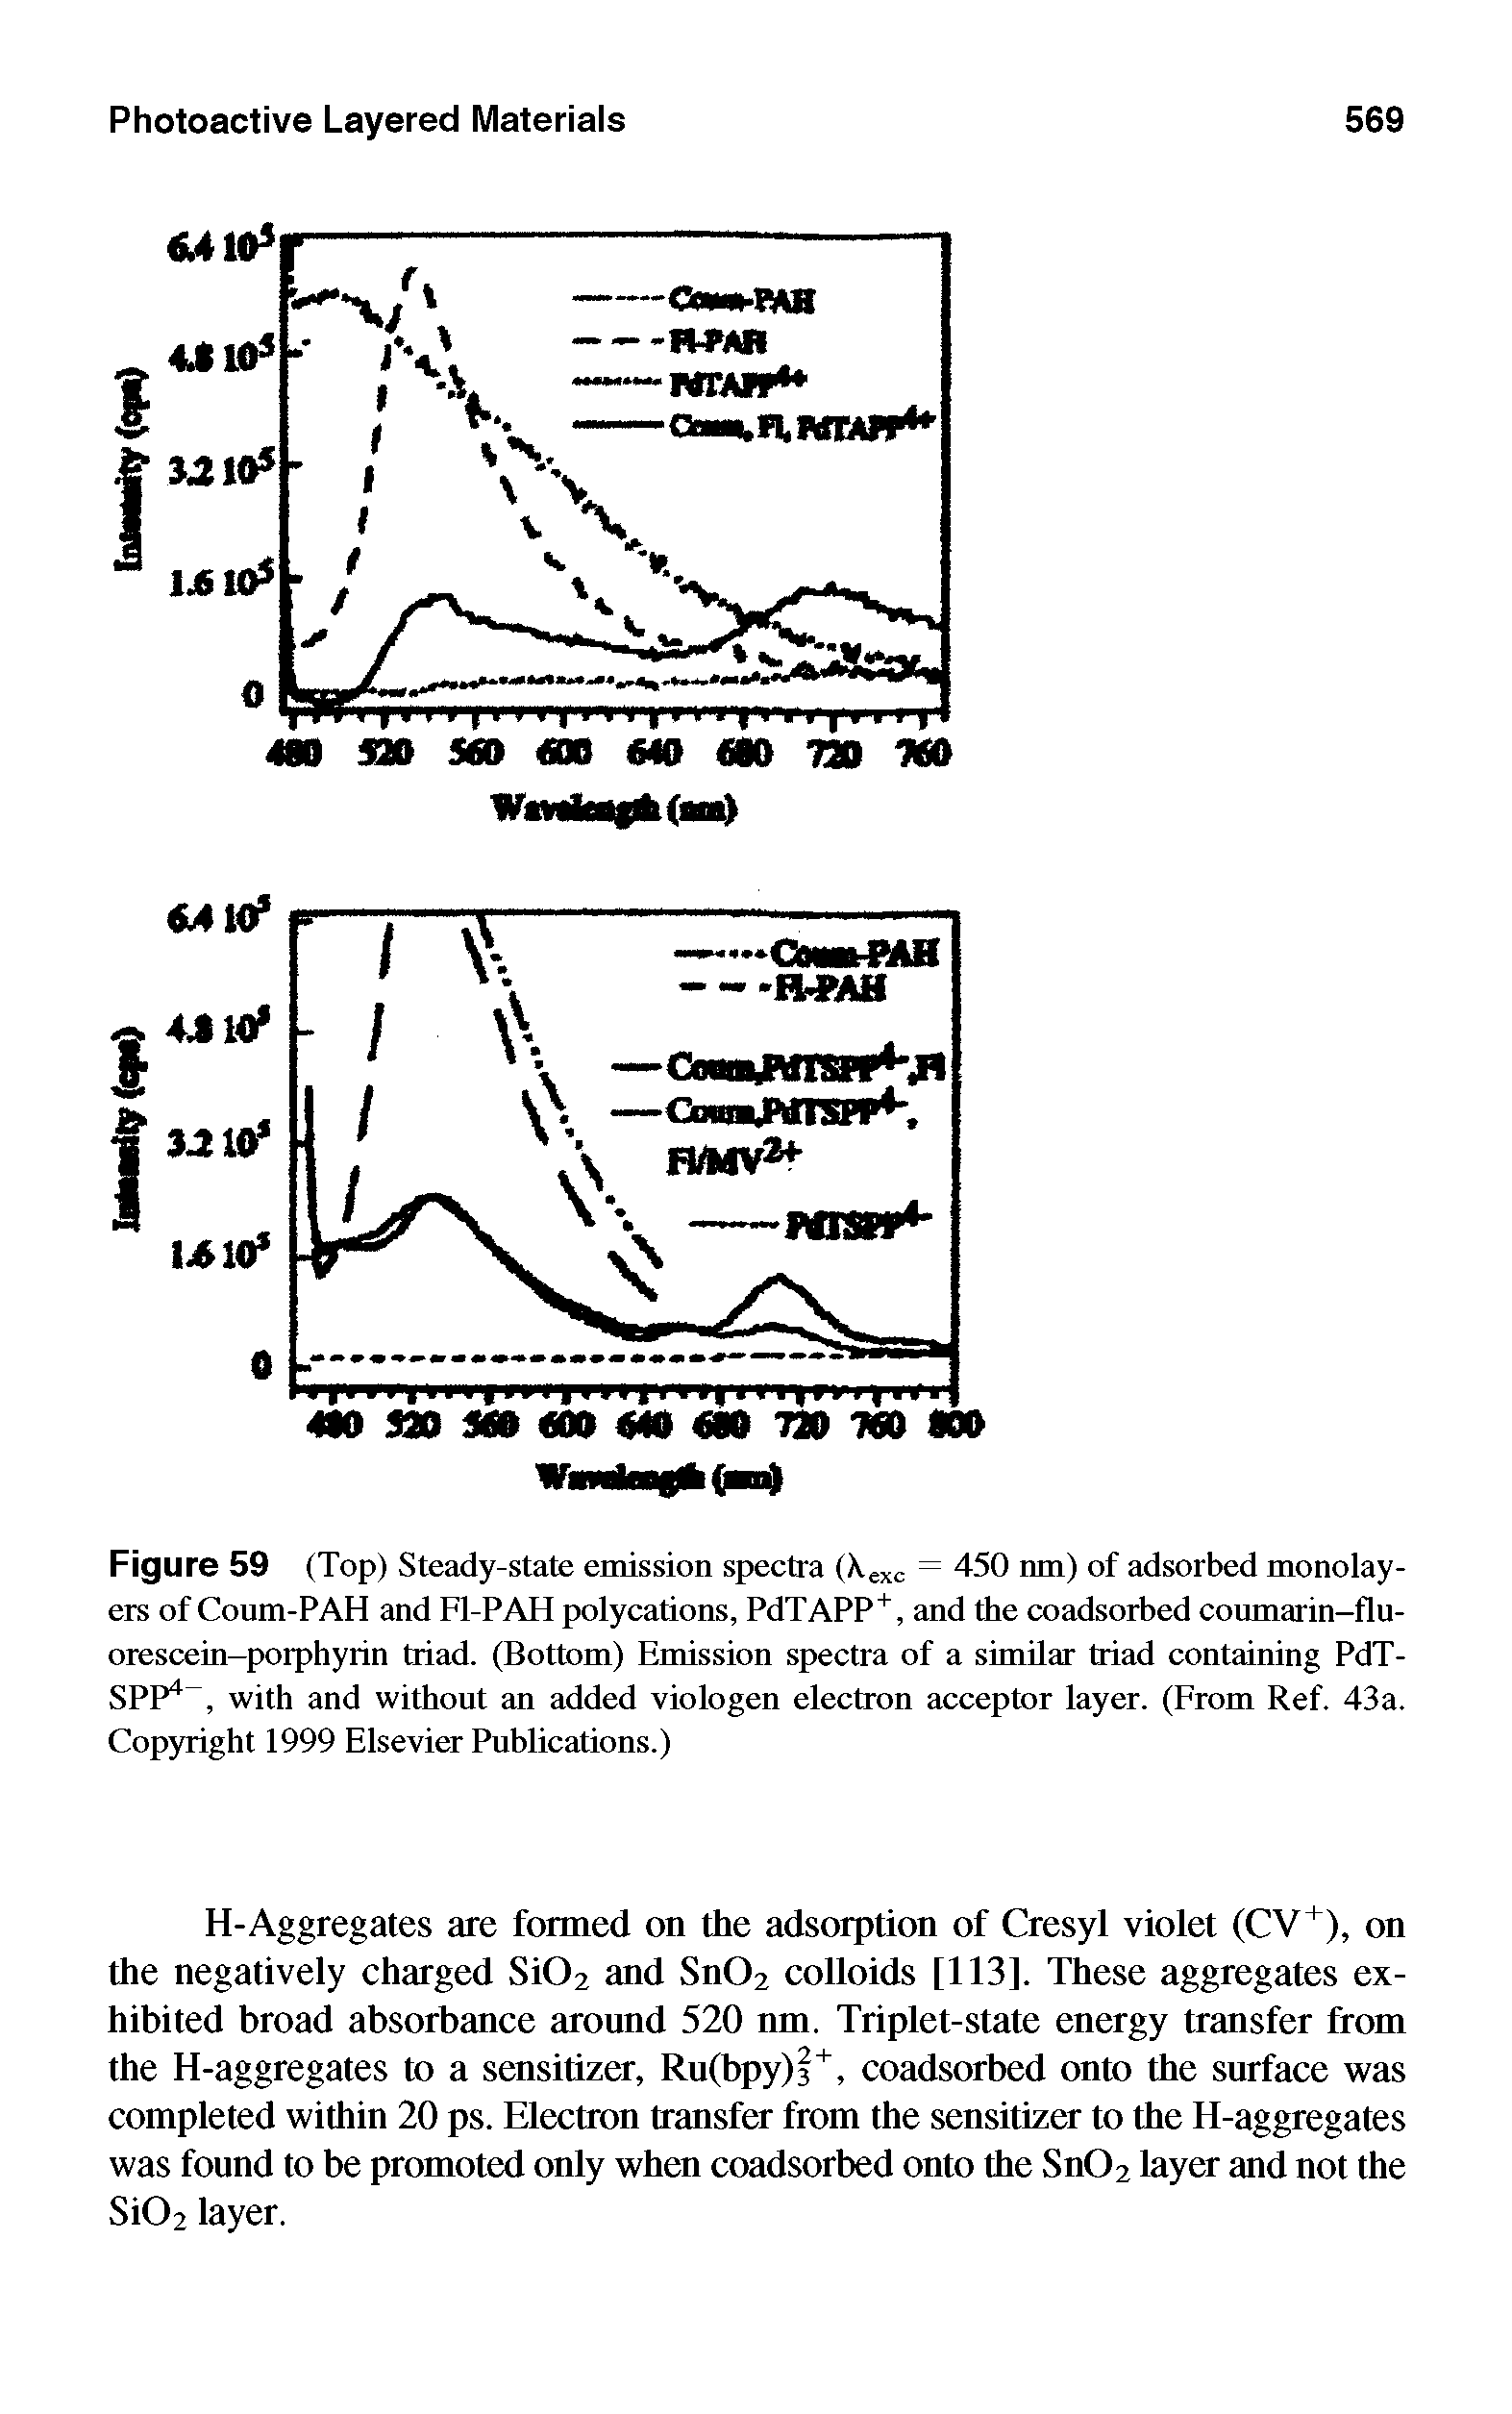 Figure 59 (Top) Steady-state emission spectra (Xexc = 450 nm) of adsorbed monolayers of Coum-PAH and Fl-PAH polycations, PdTAPP+, and the coadsorbed coumarin-flu-orescein-porphyrin triad. (Bottom) Emission spectra of a similar triad containing PdT-SPP4, with and without an added viologen electron acceptor layer. (From Ref. 43a. Copyright 1999 Elsevier Publications.)...